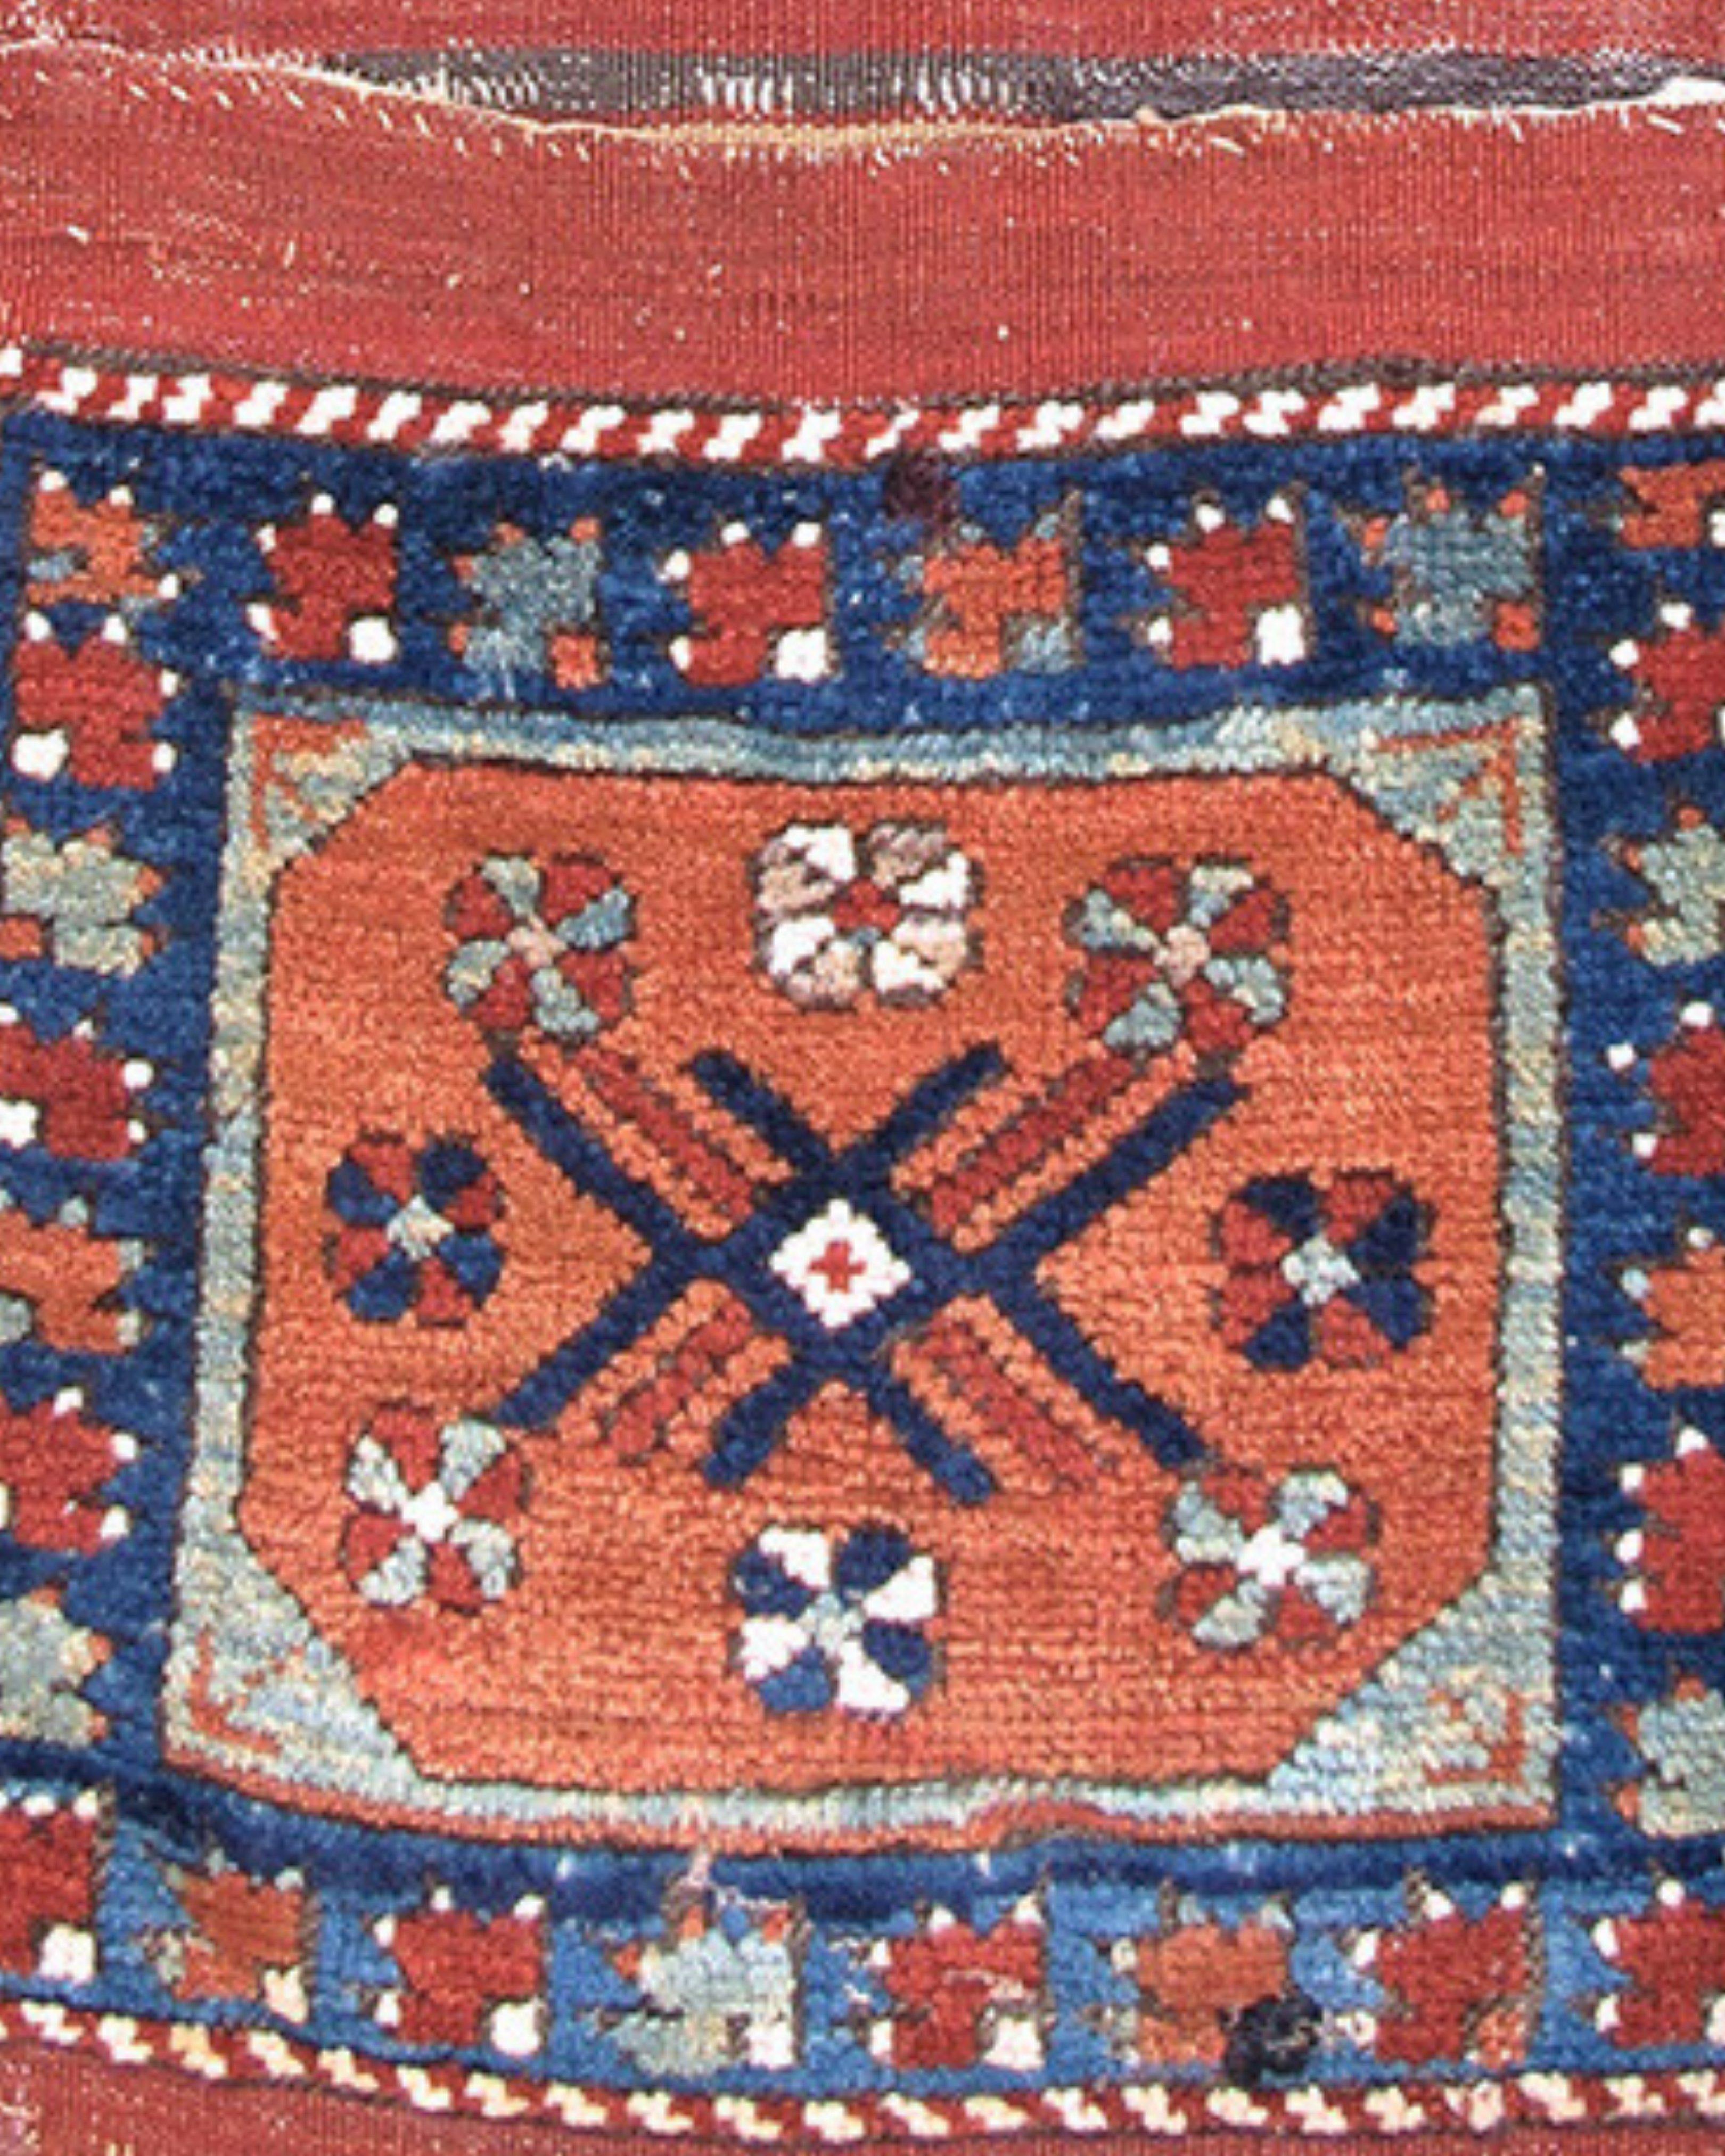 Antique Anatolian Turkish Bergama Heybe Bags Rug, Late 19th Century

Additional Information:
Dimensions: 1'8